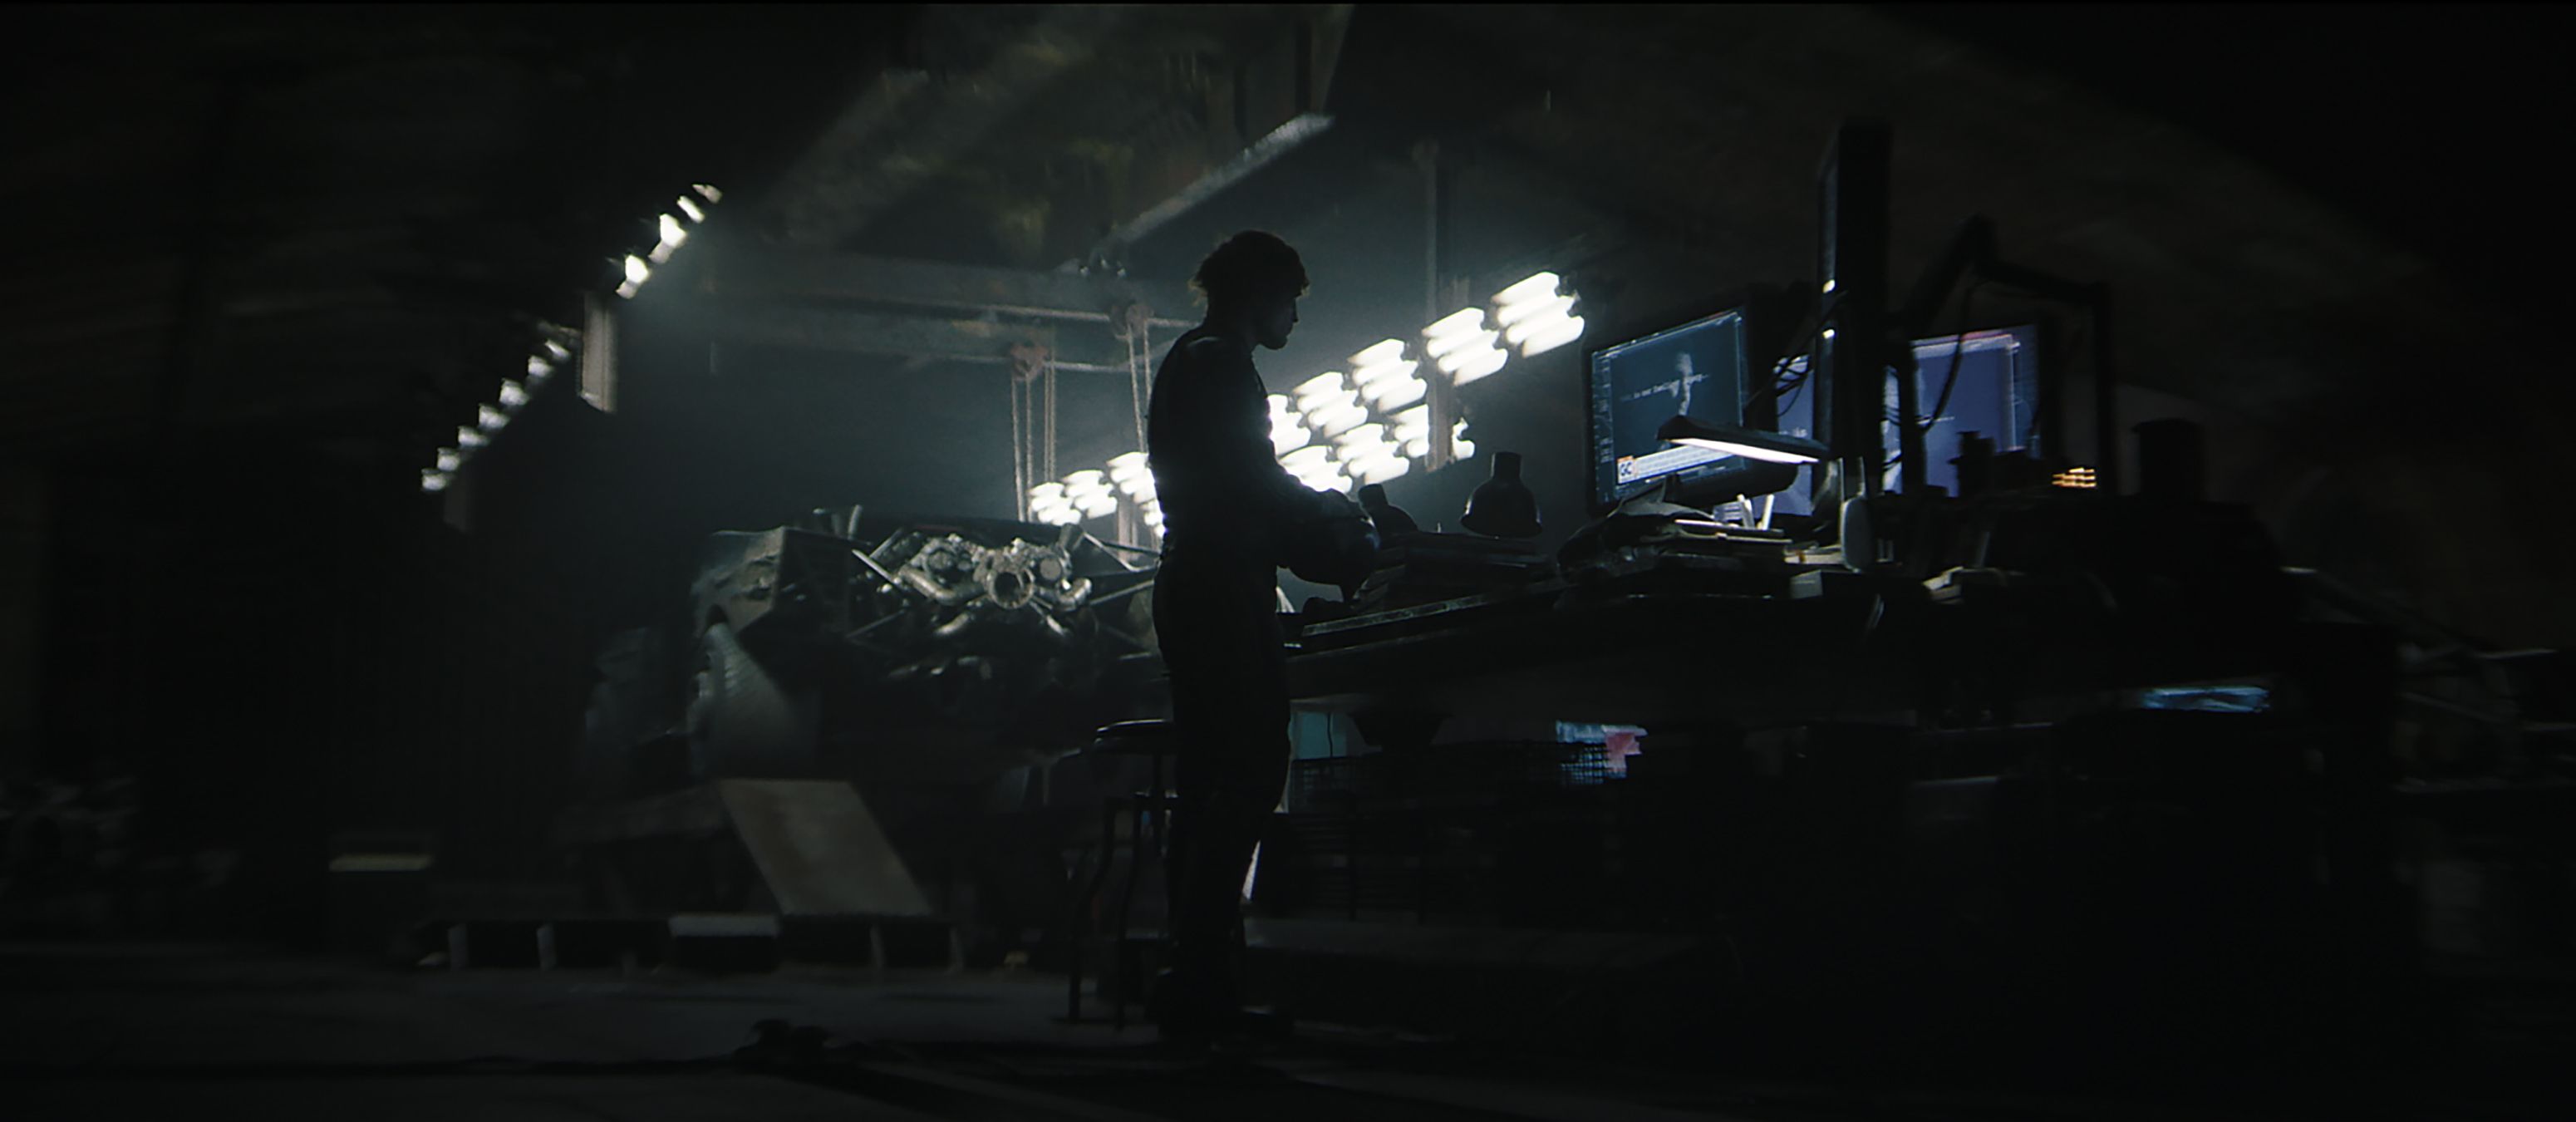 First Look at the Batcave In The Batman Official Images